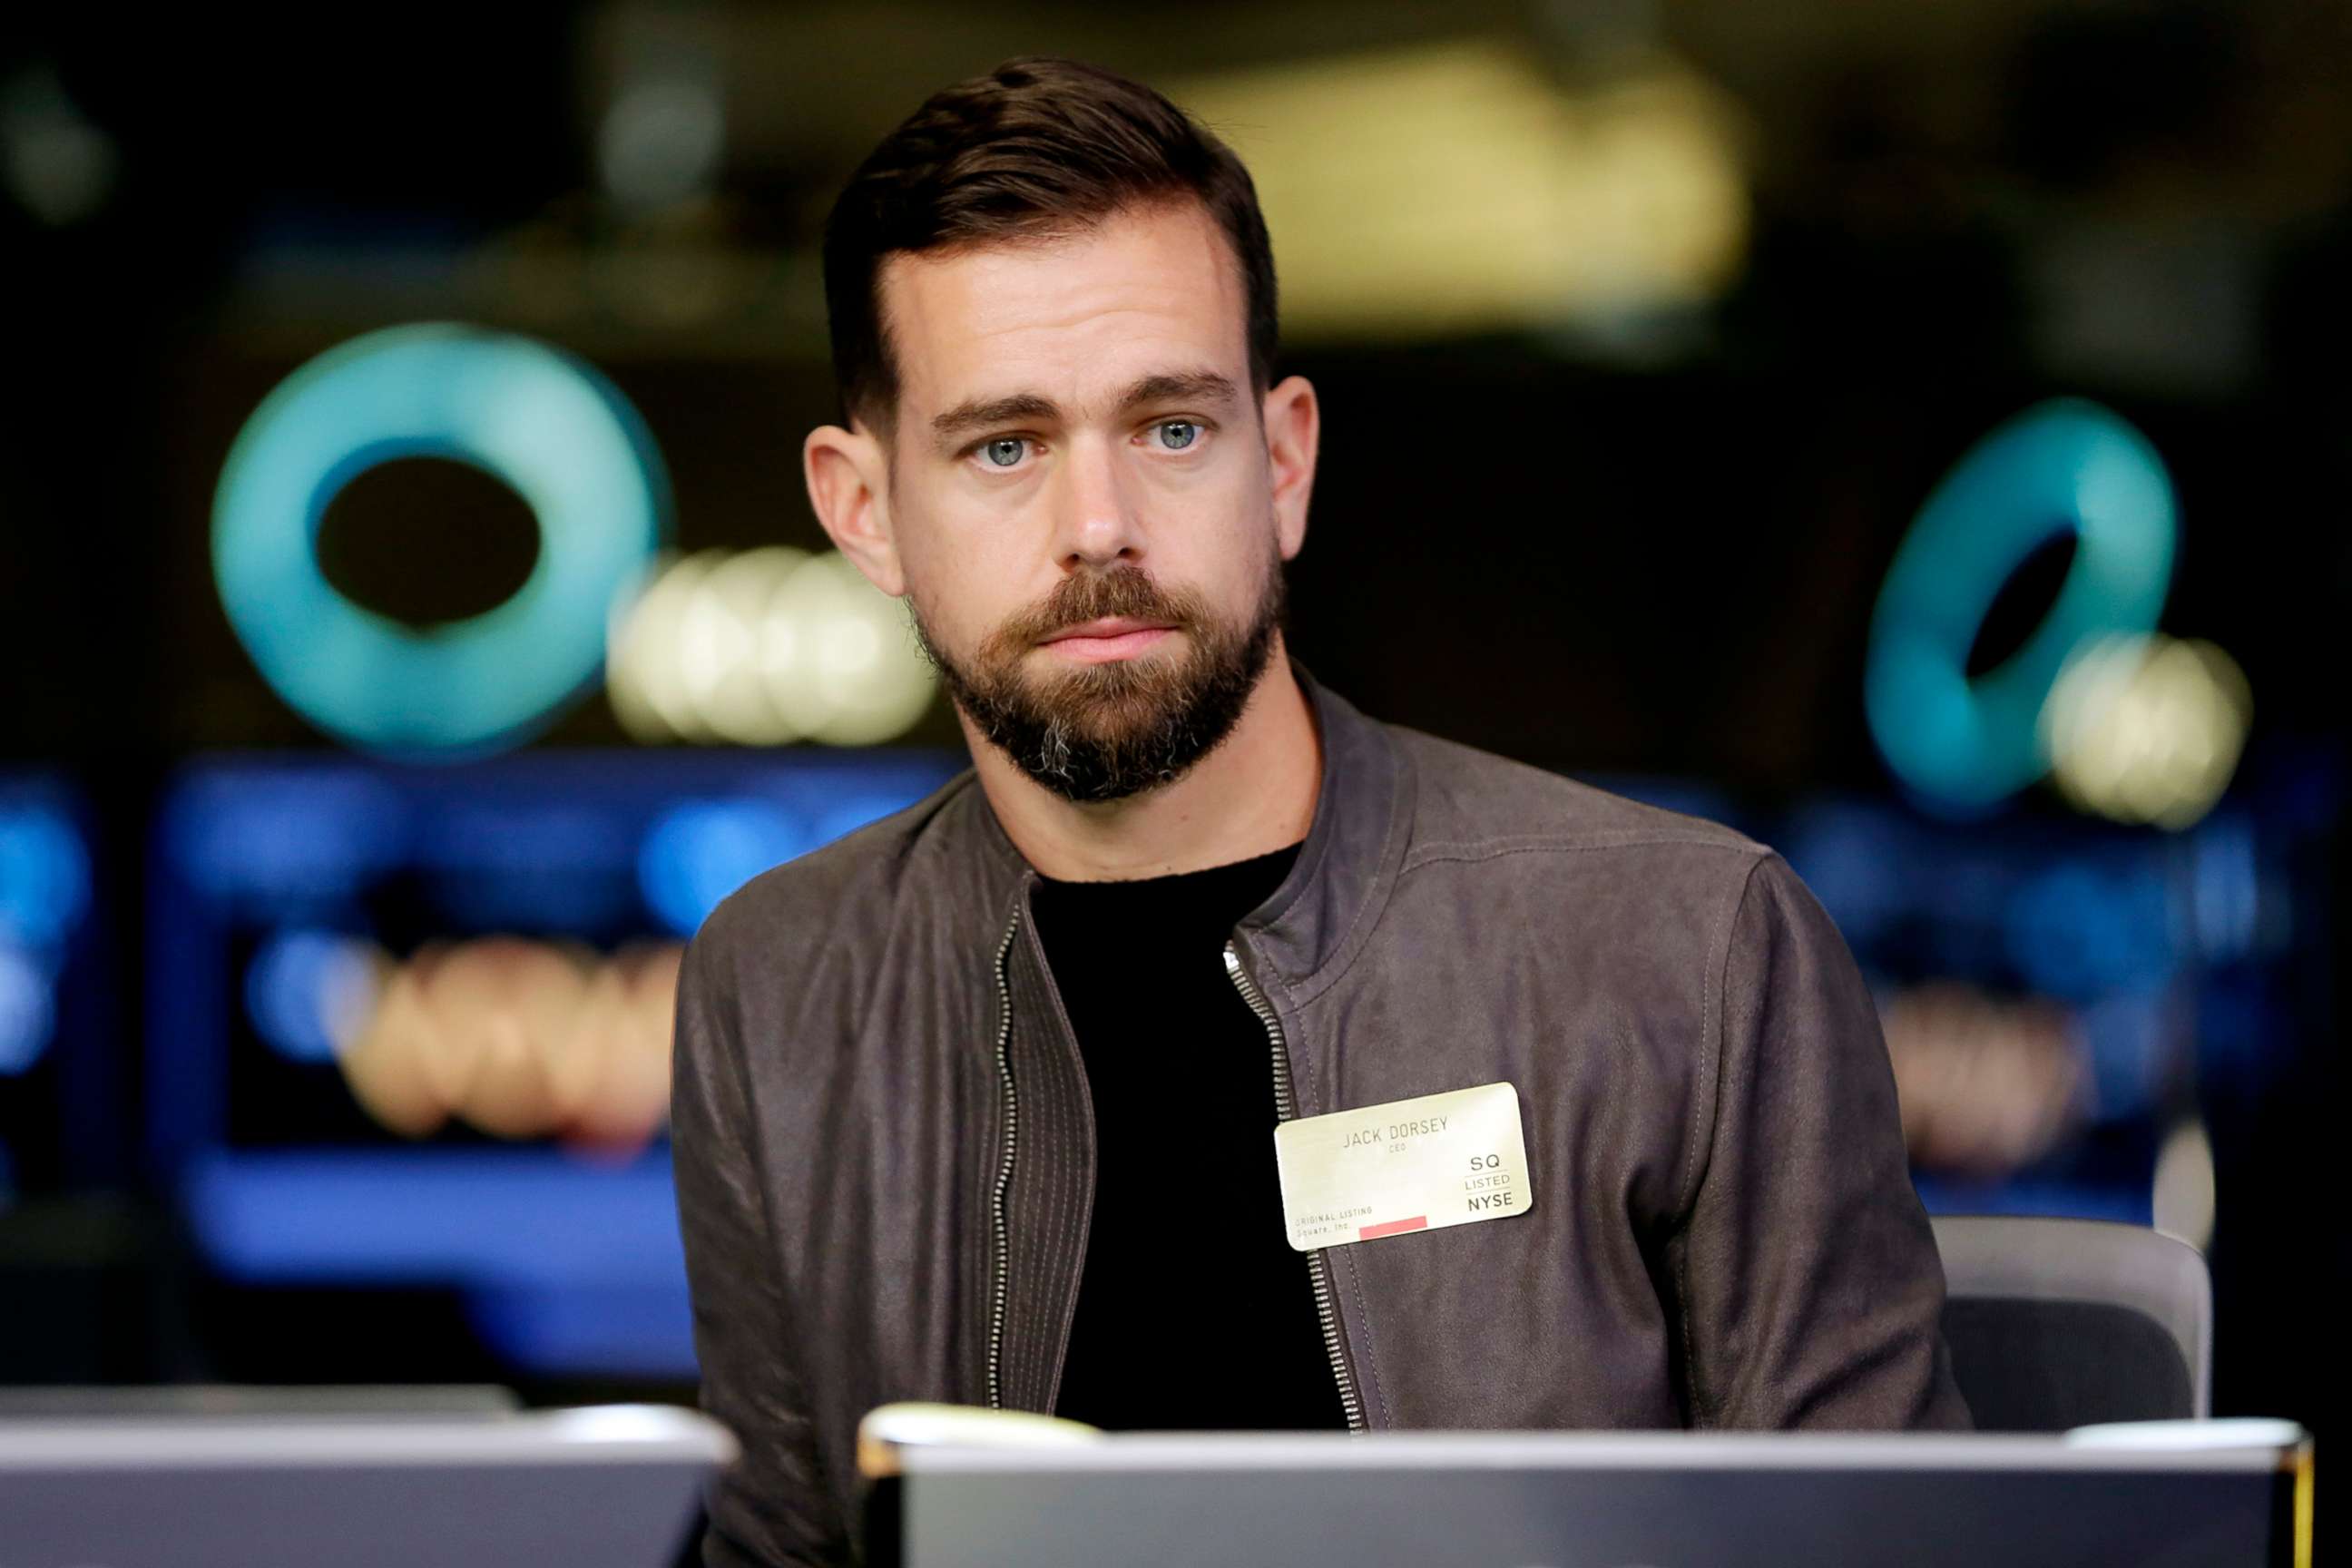 PHOTO: This Nov. 19, 2015, file photo shows Twitter CEO Jack Dorsey being interviewed on the floor of the New York Stock Exchange.